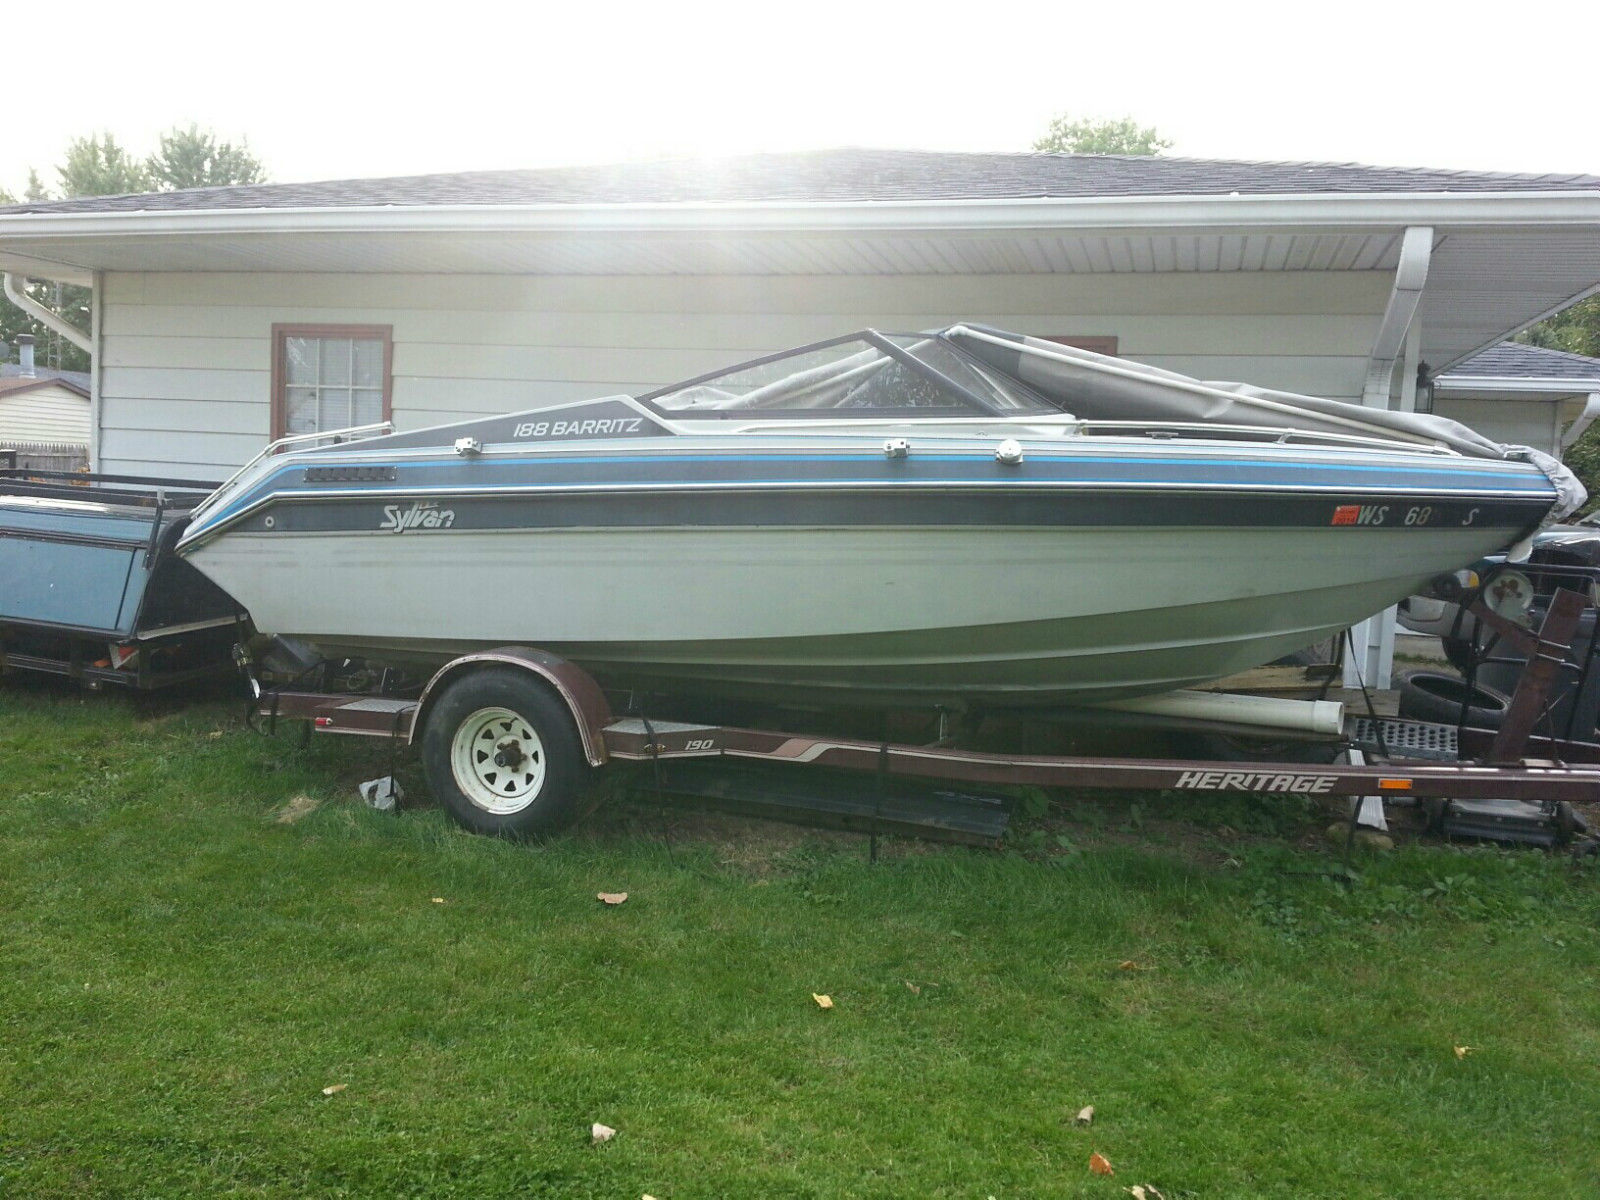 Sylvan V188 1990 for sale for $1,500 - Boats-from-USA.com